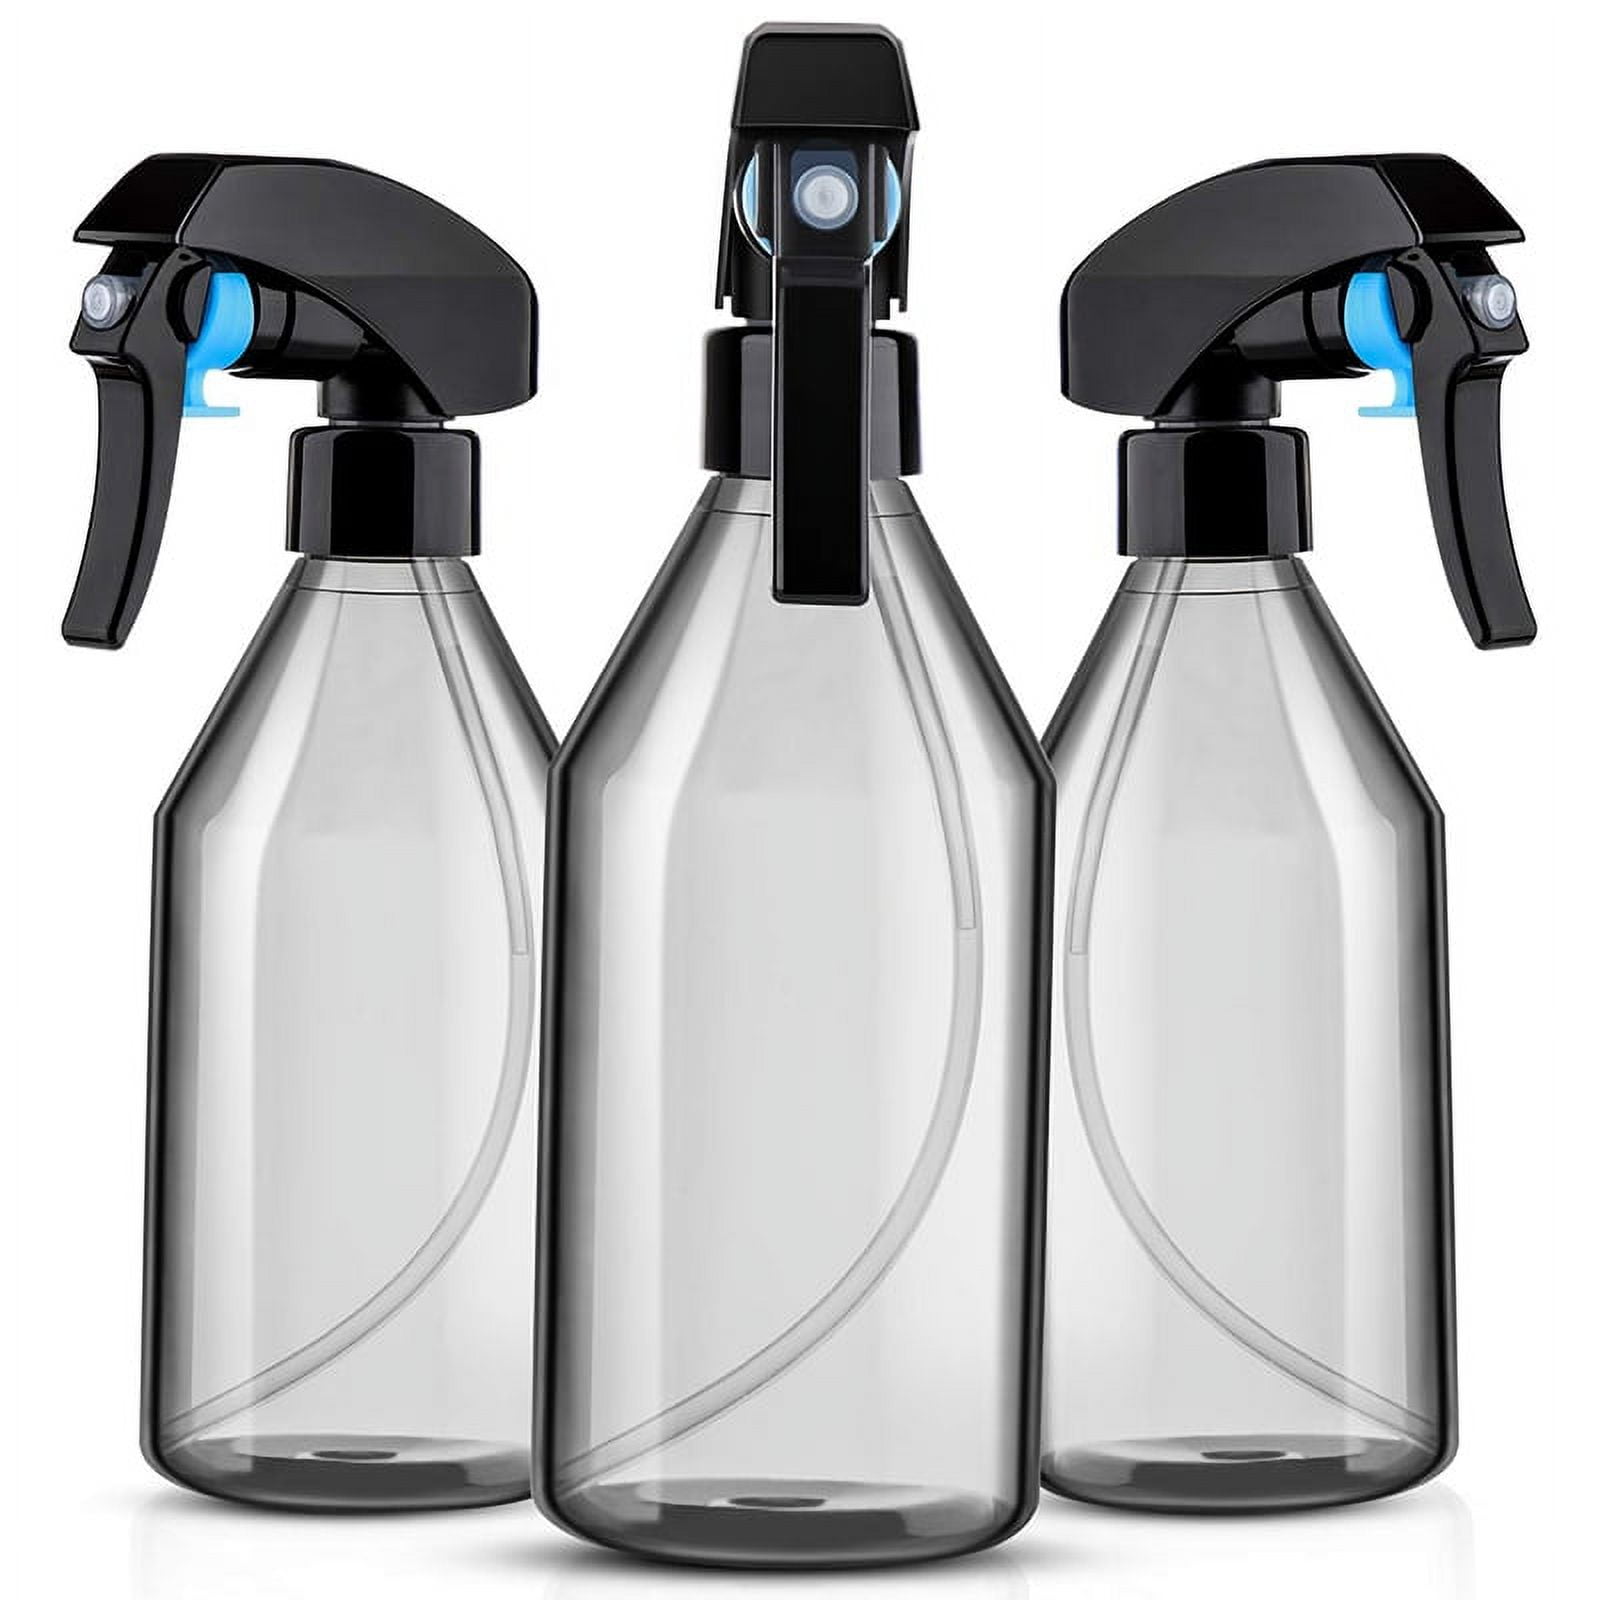 Plastic Spray Bottles for Cleaning Solutions,10OZ Reusable Empty Container  with Durable Black Trigger Sprayer, 3Pack 